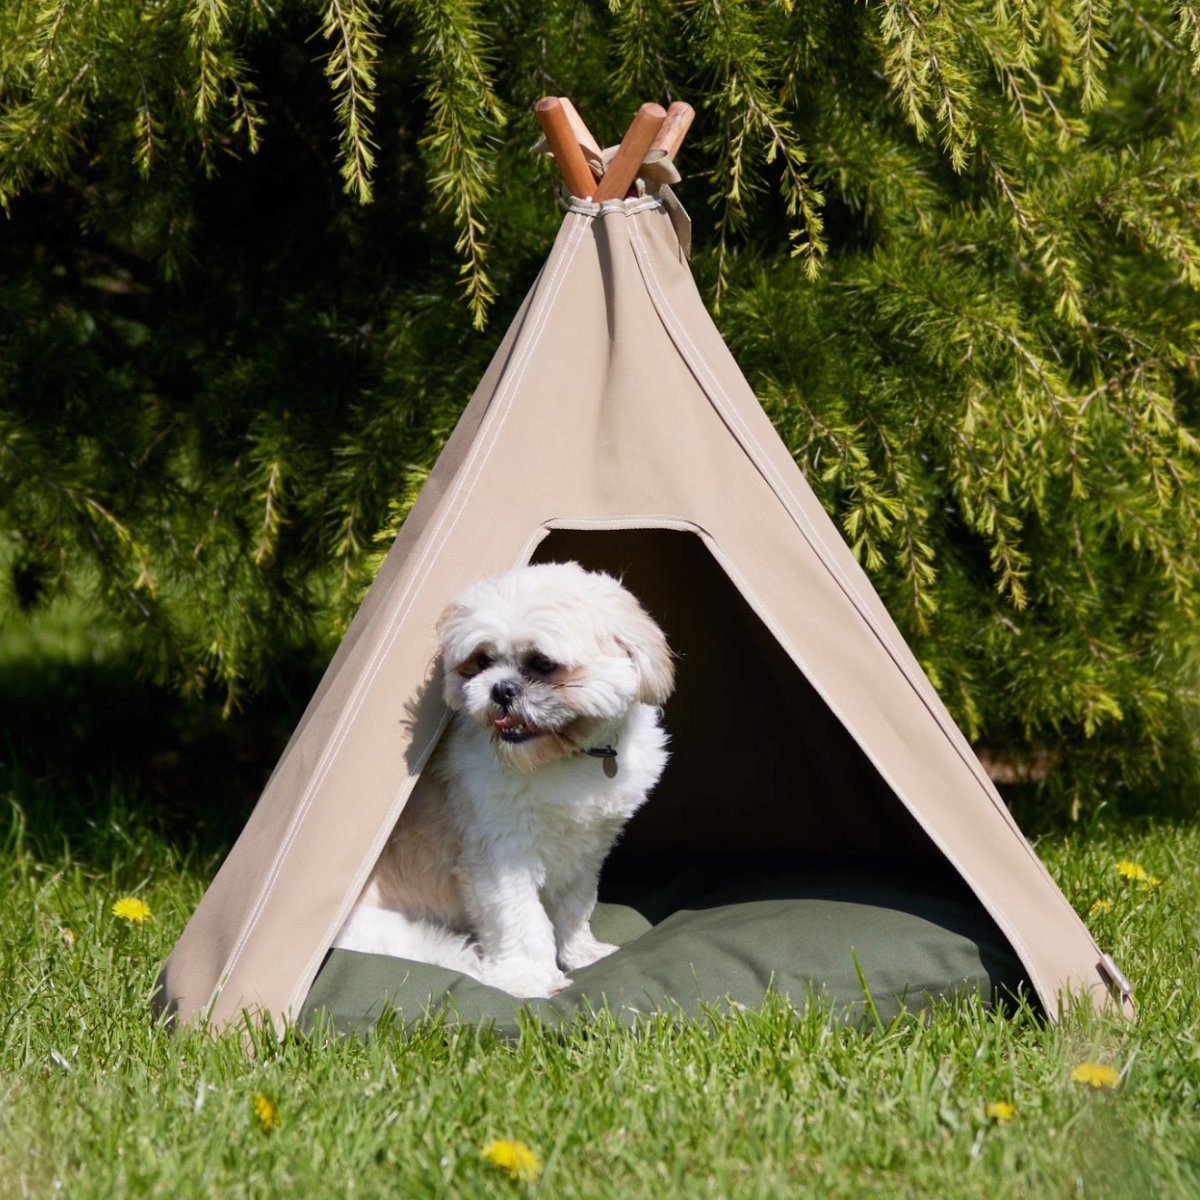 Outdoor dog bed. Dog in outdoor, waterproof dog teepee shading from sun 